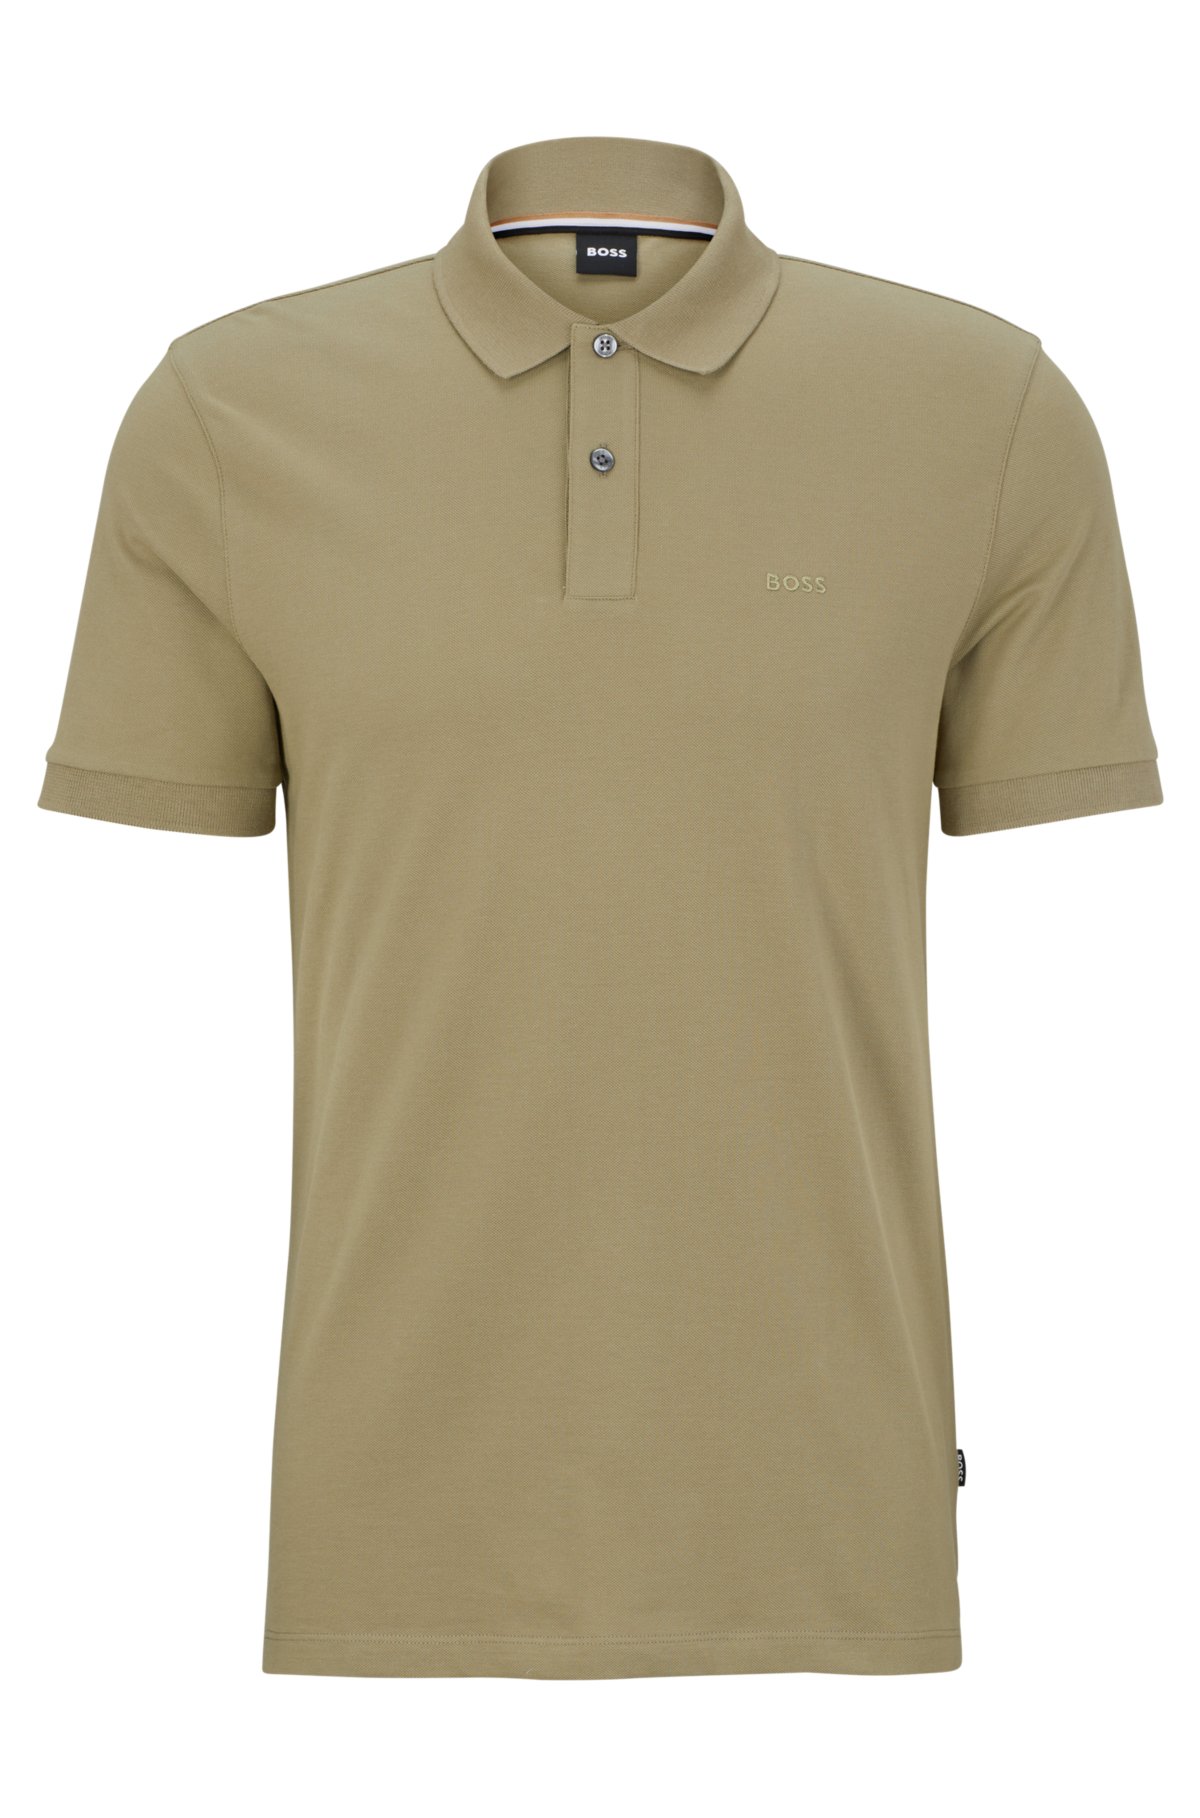 - polo BOSS shirt logo Cotton with embroidered